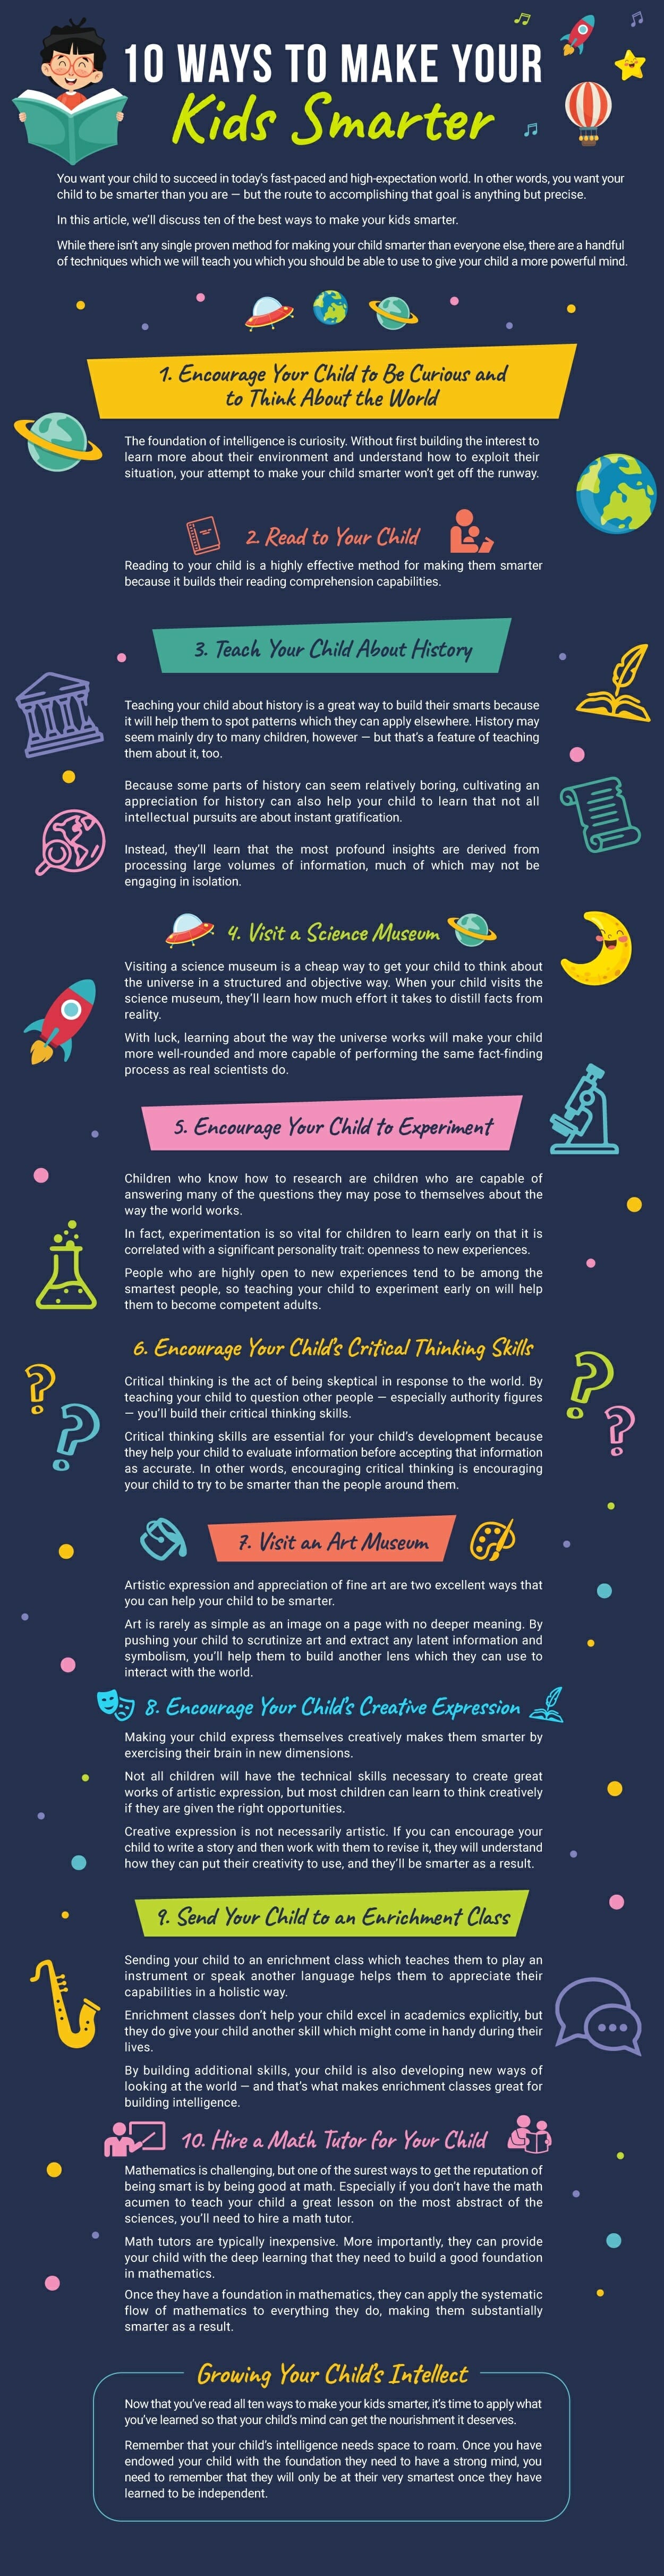 10 Ways To Make Your Kids Smarter - Infographic